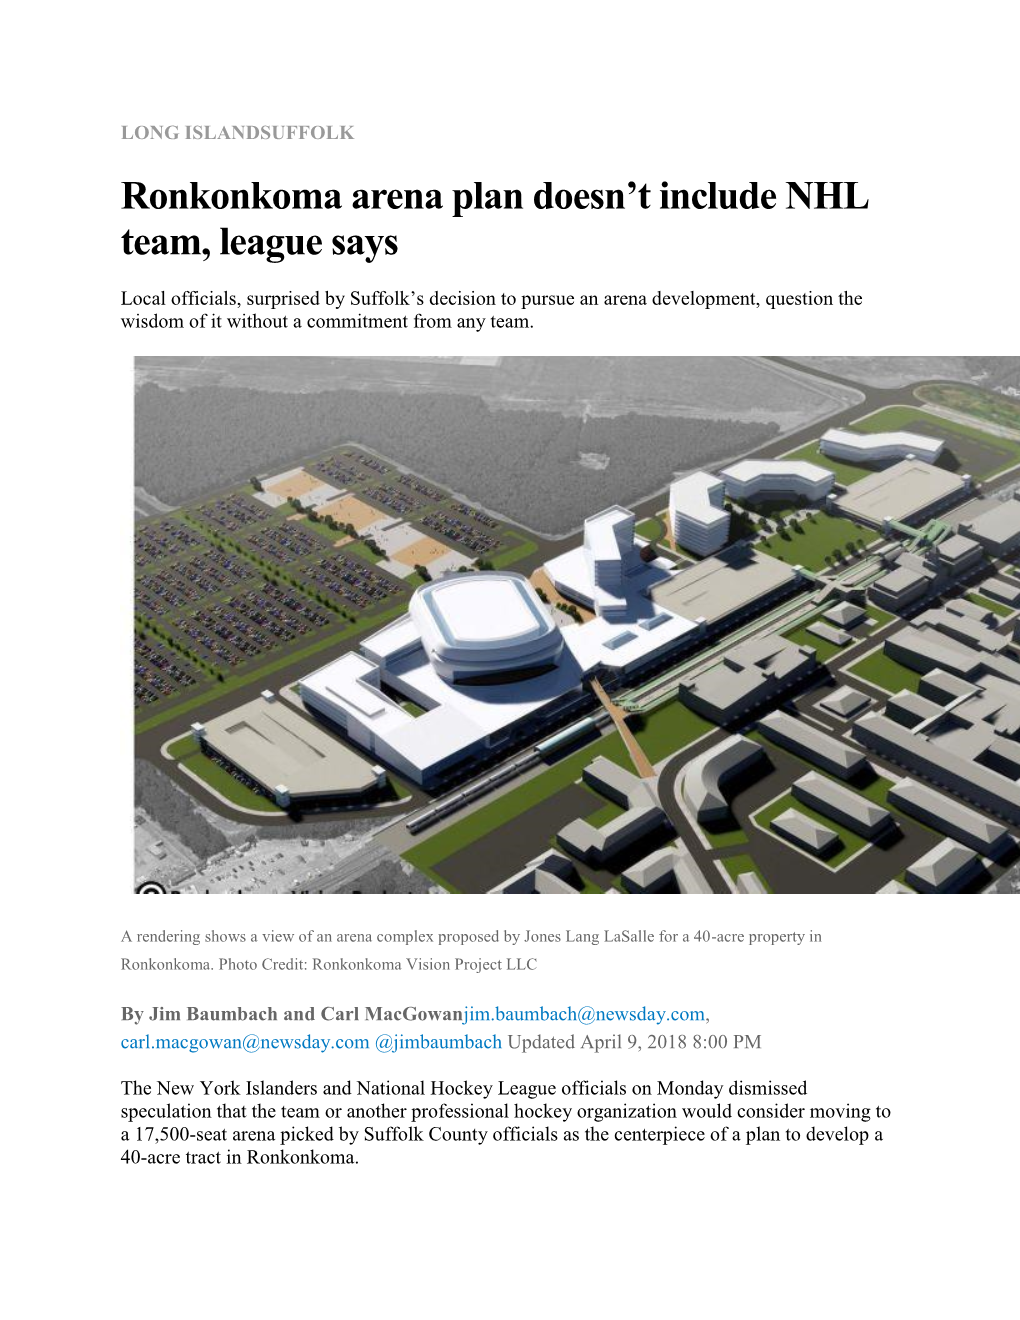 Ronkonkoma Arena Plan Doesn't Include NHL Team, League Says